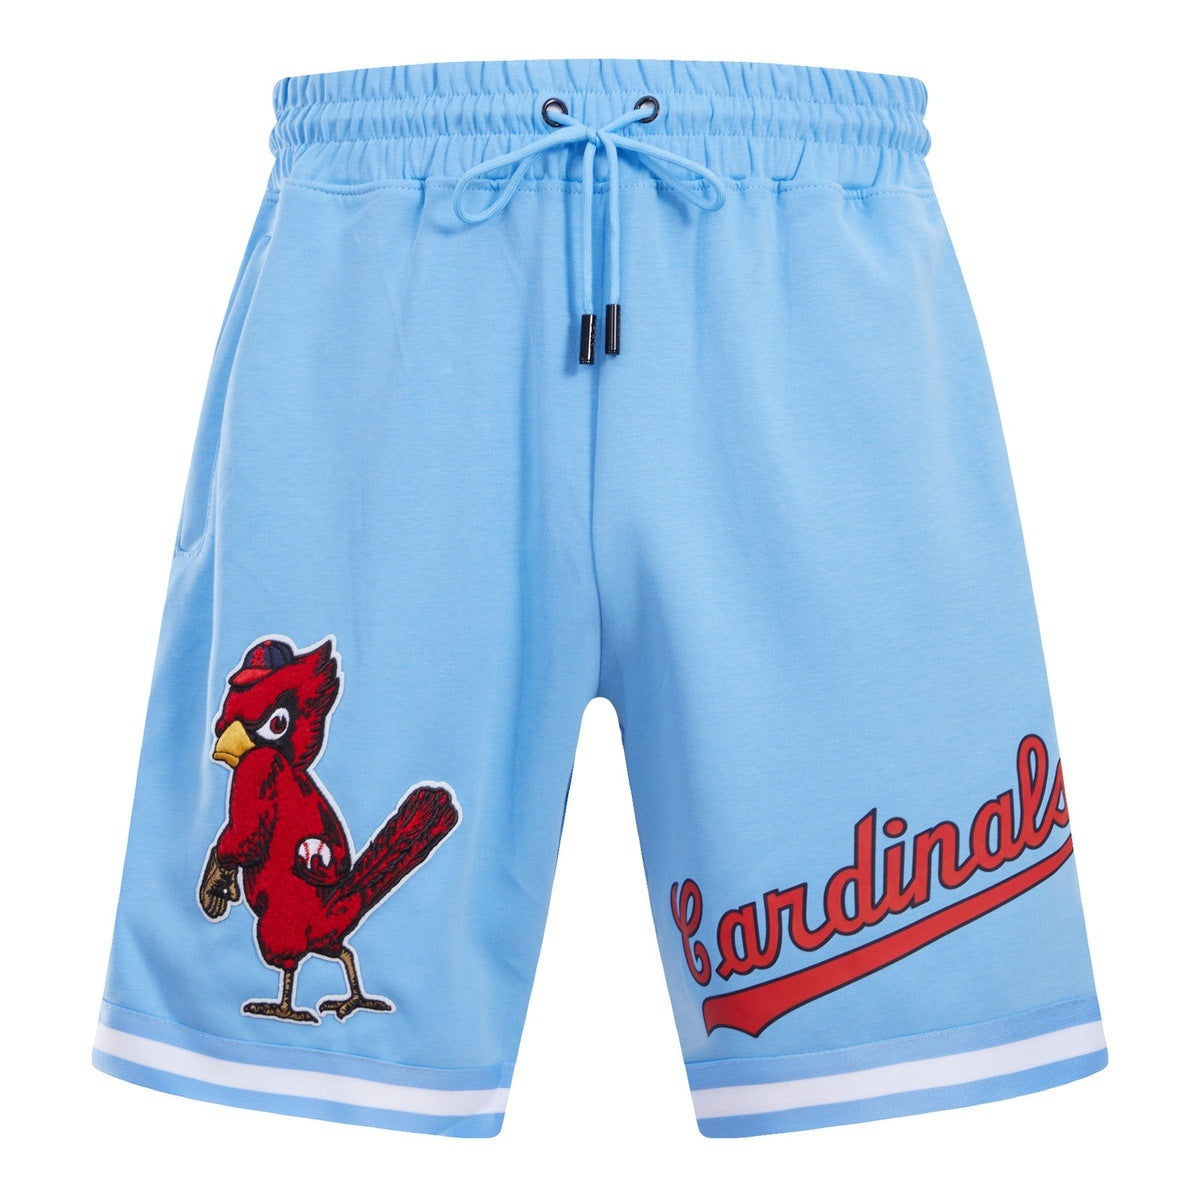 Pro Standard Mens MLB St. Louis Cardinals Retro Classic Dk 2.0 Shorts  LSC335480-RDW Red/White